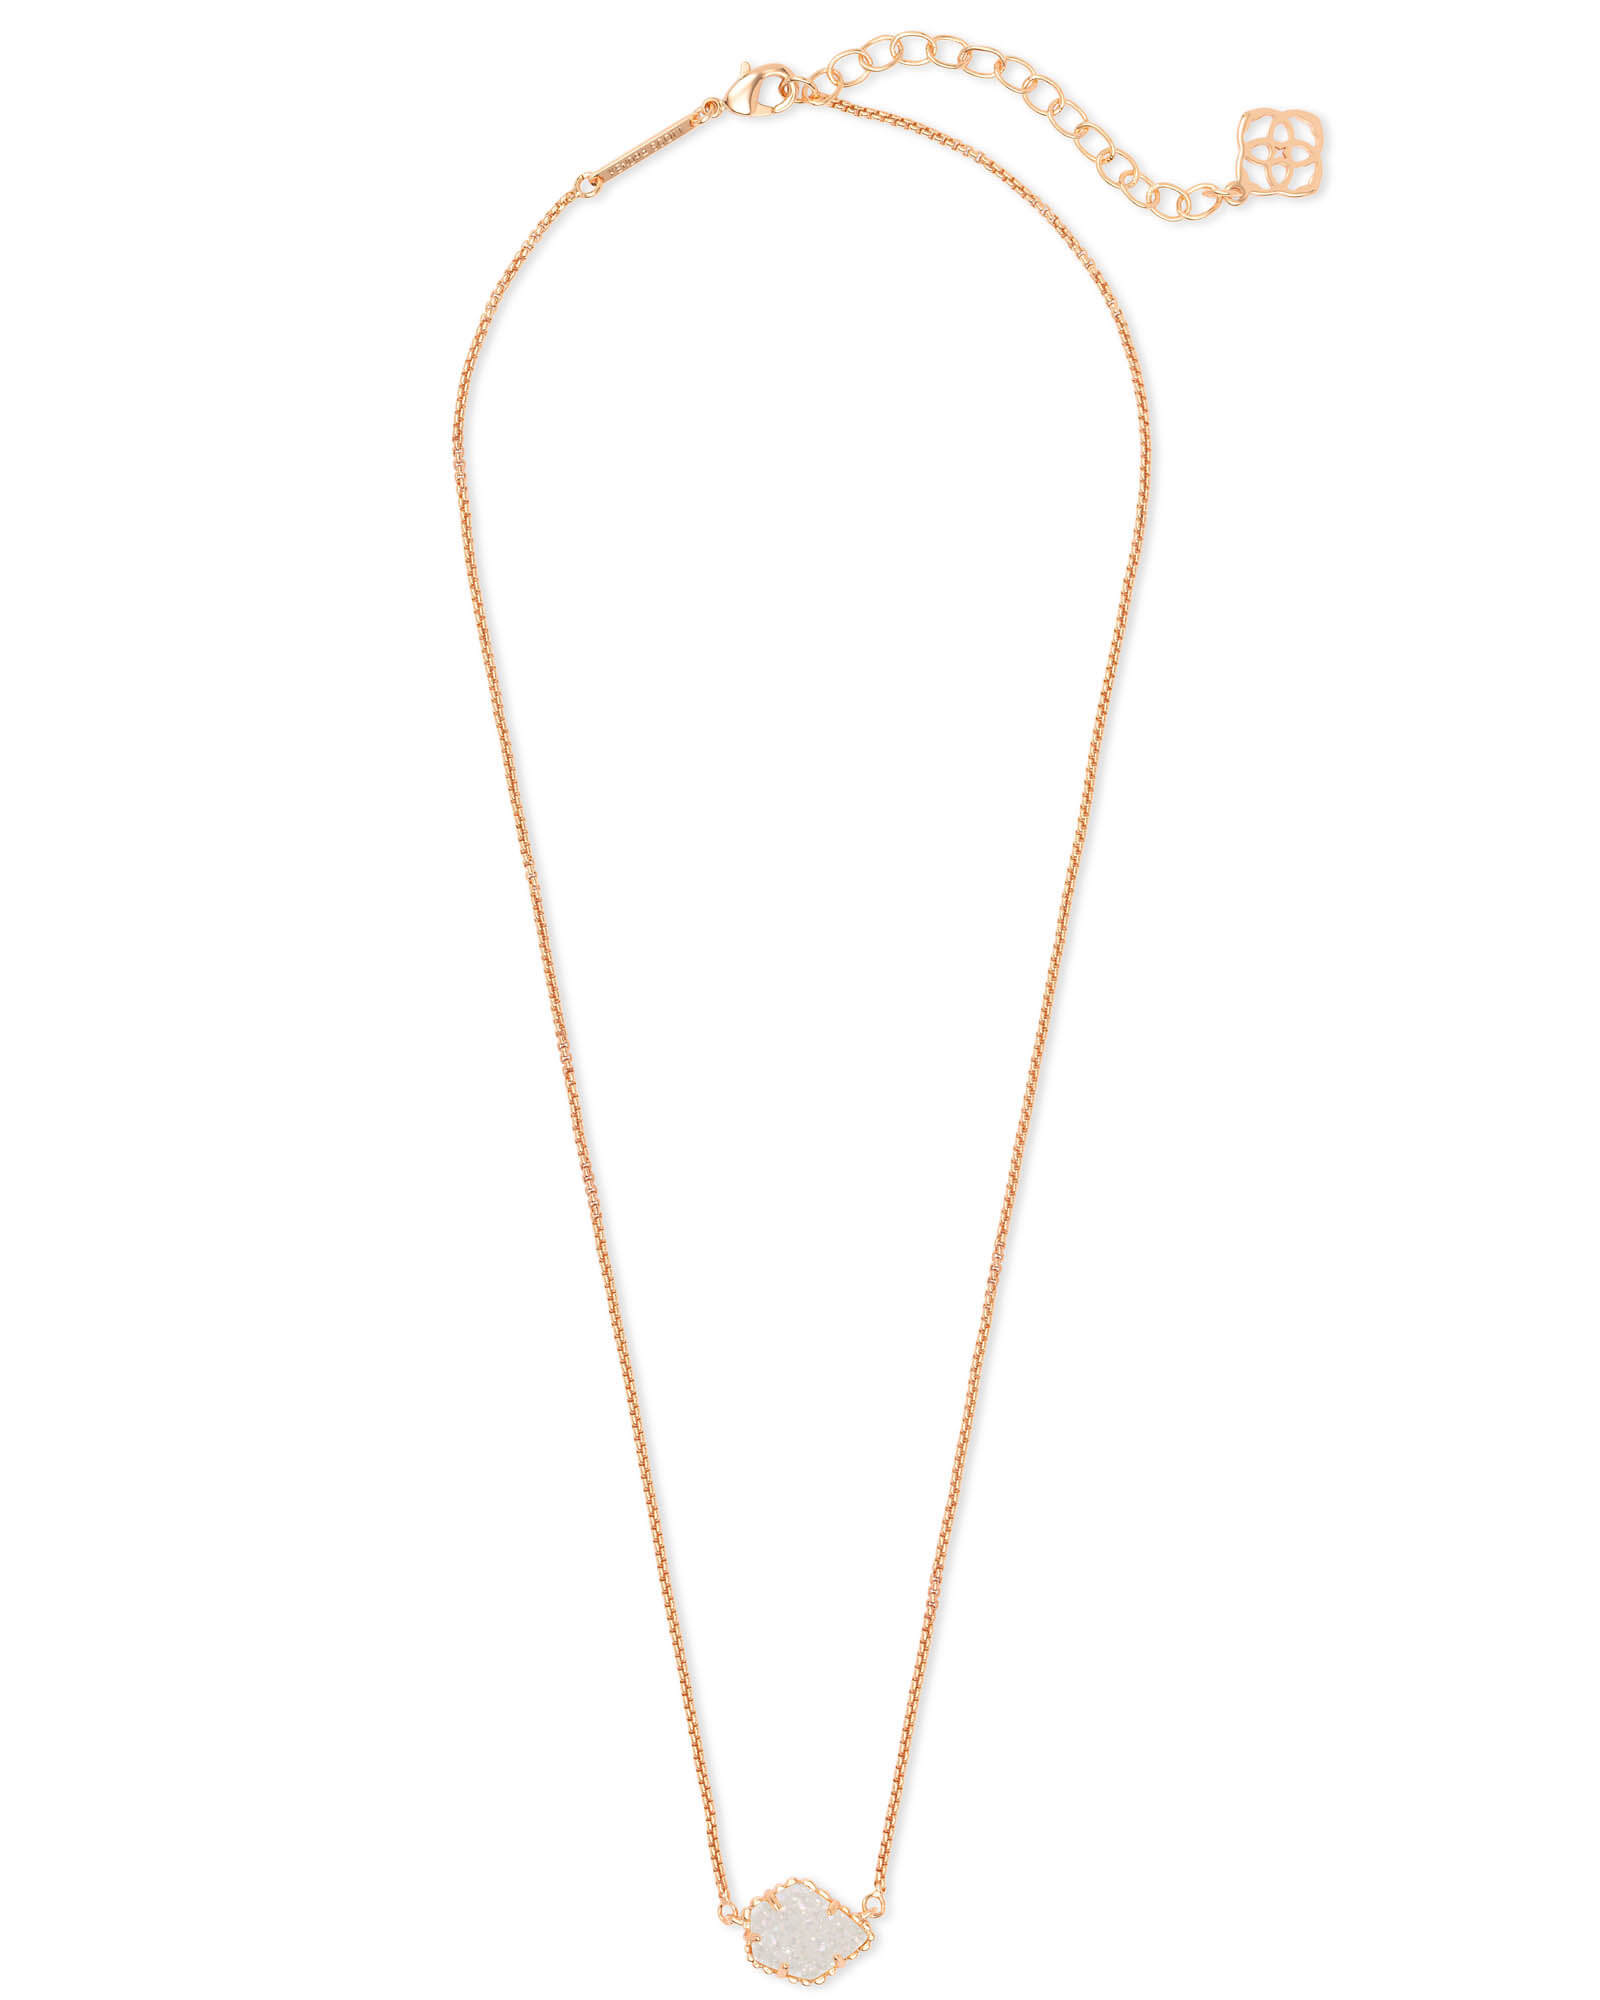 Tess Rose Gold Pendant Necklace in Iridescent Drusy